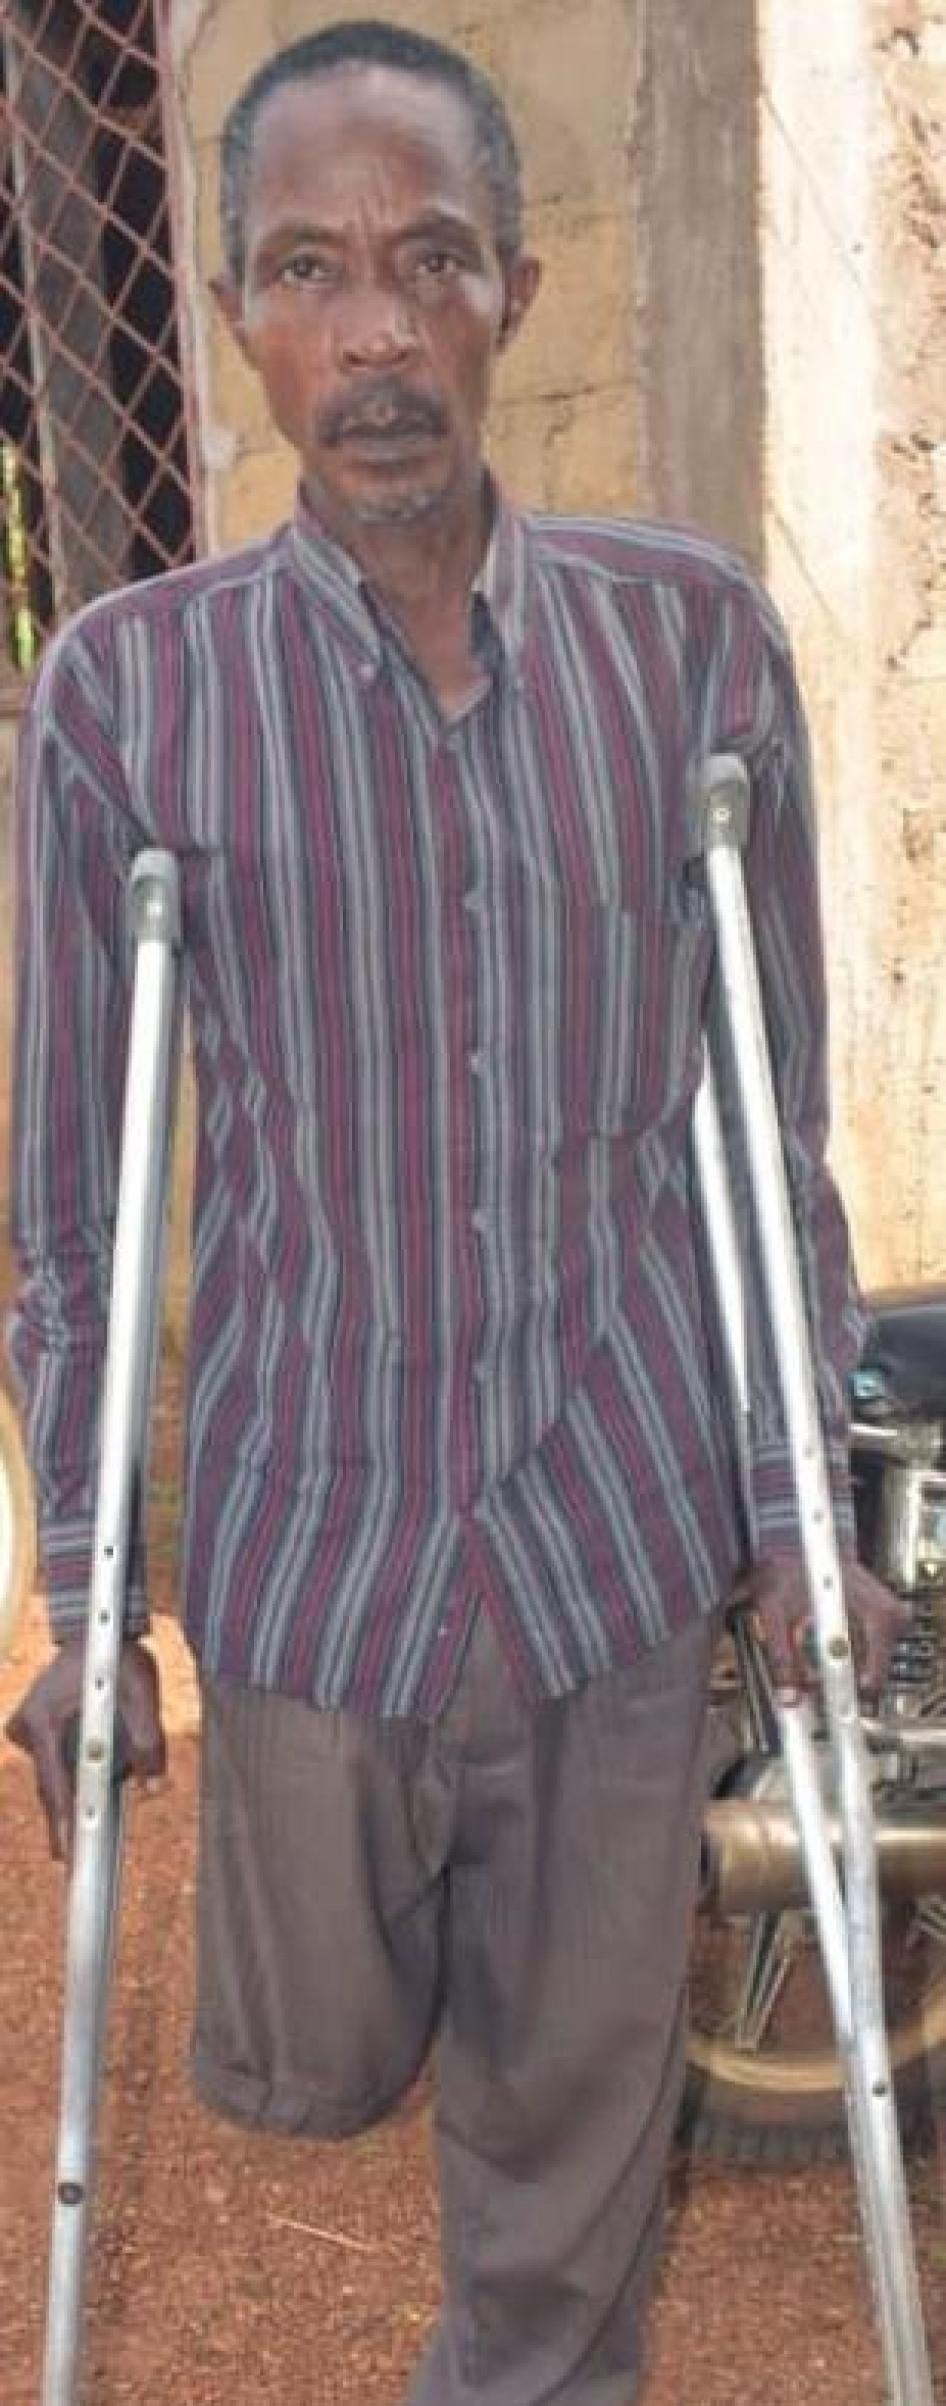 Egbe Aron Ayuk, 62 years old, has a physical disability and was forced to flee his village in the South-West region of Cameroon following clashes between armed separatists and security forces. May 18, 2019.